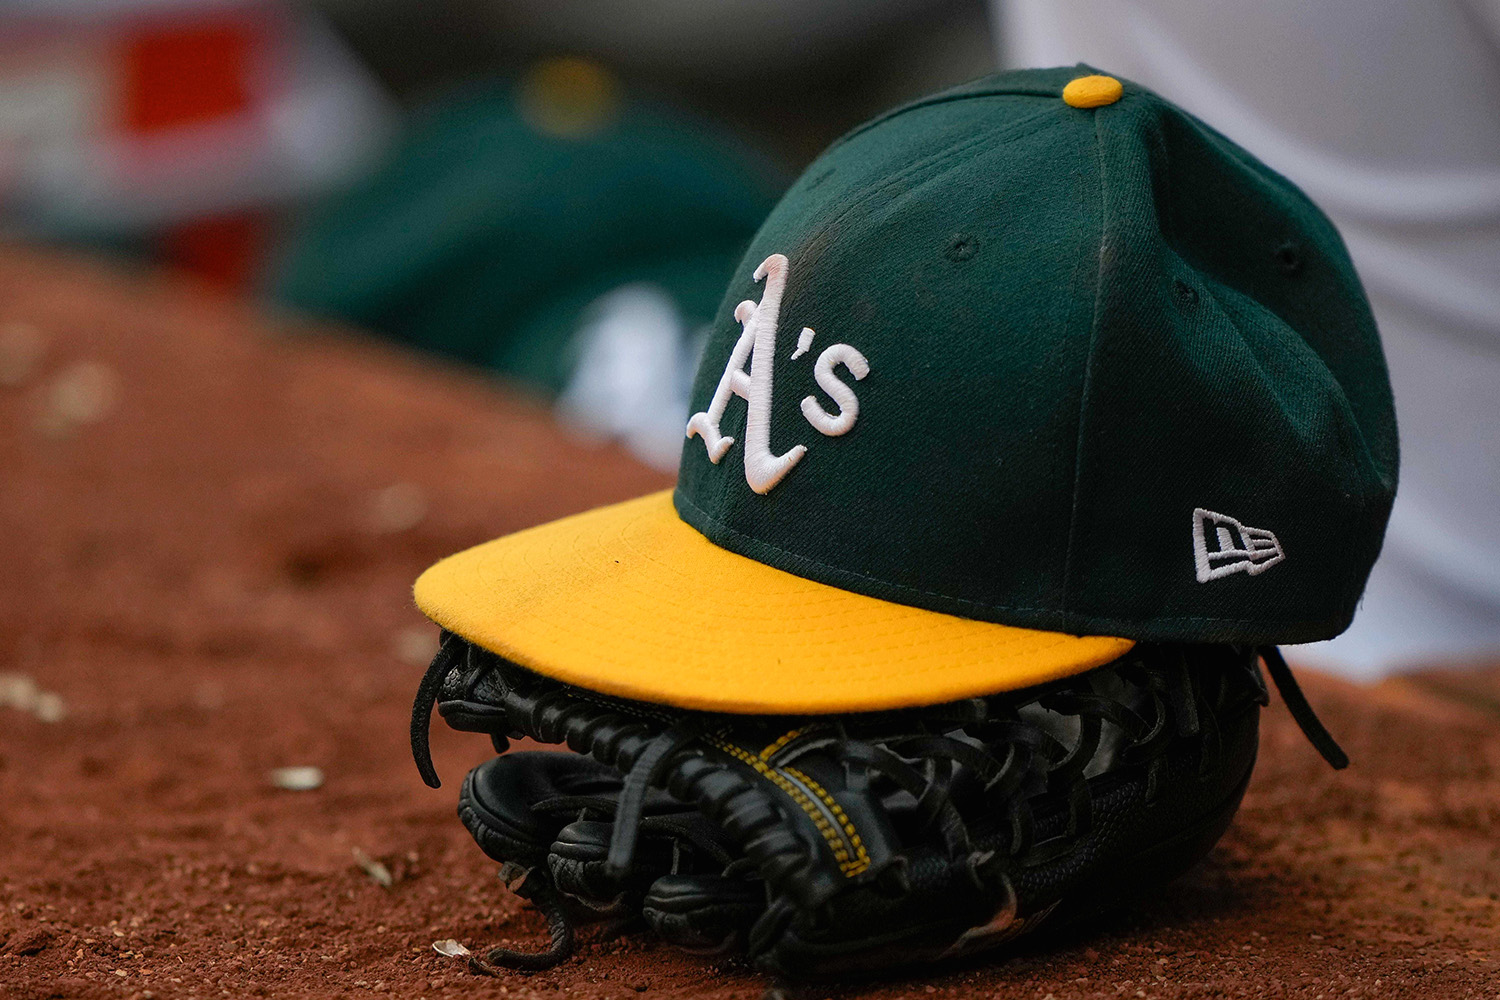 The Oakland A's are still exploring options on where to build a stadium.